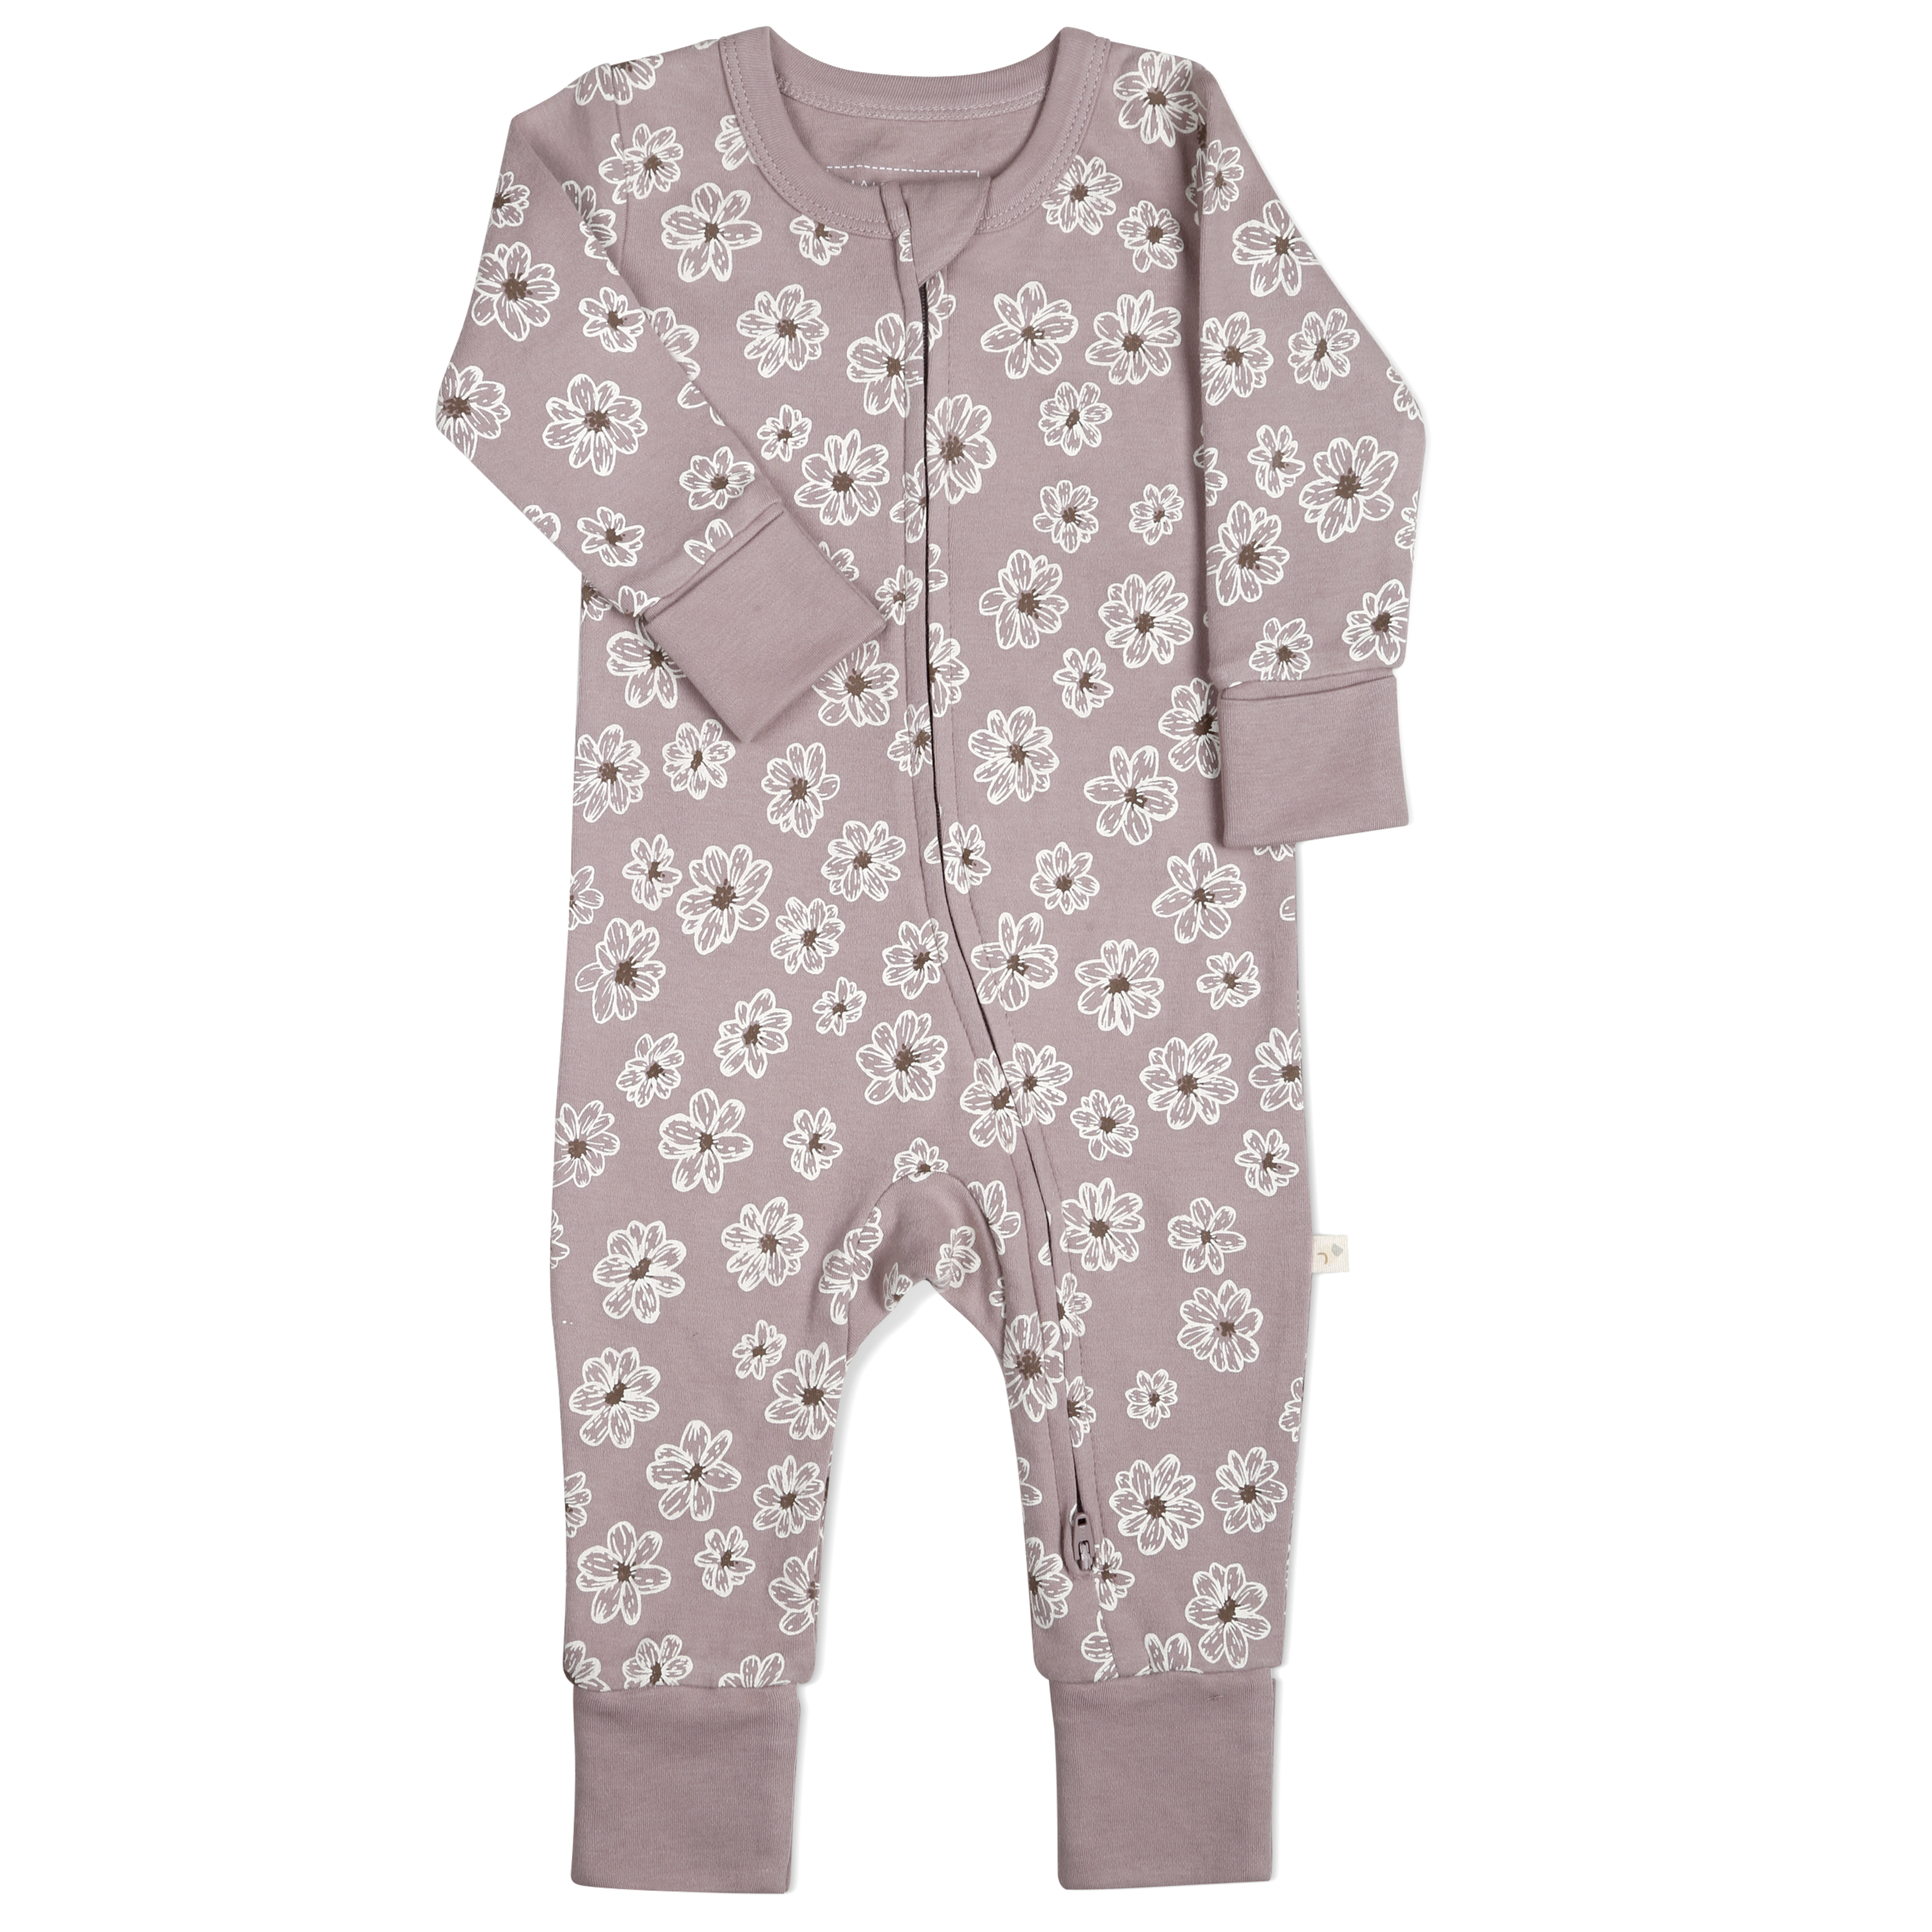 A long-sleeved baby onesie in a soft taupe color adorned with white floral patterns, featuring snap fasteners from the neckline down to the left ankle for easy dressing.